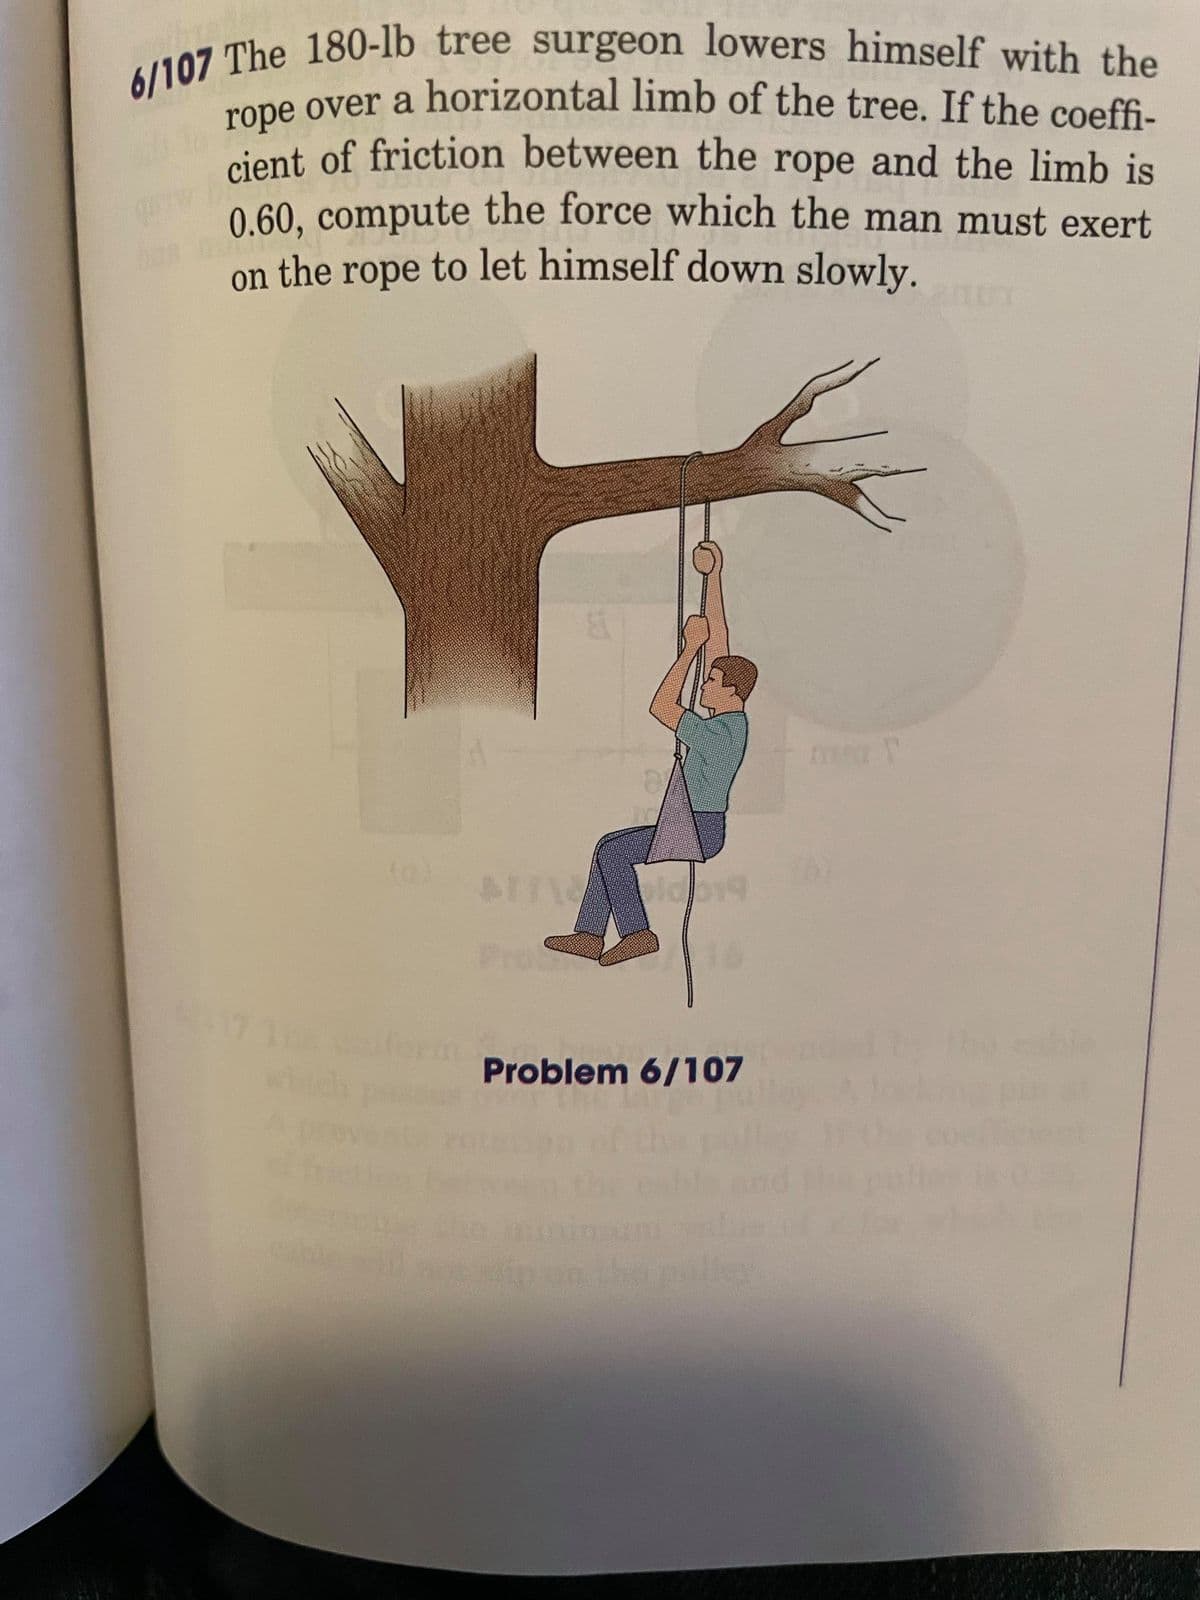 6/107 The 180-lb tree surgeon lowers himself with the
rope over a horizontal limb of the tree. If the coeffi-
cone over a horizontal limb of the tree. If the coeffi-
cient of friction between the rope and the limb is
0.60, compute the force which the man must exert
to let himself down slowly.
on the
rope
17 1
Problem 6/107
